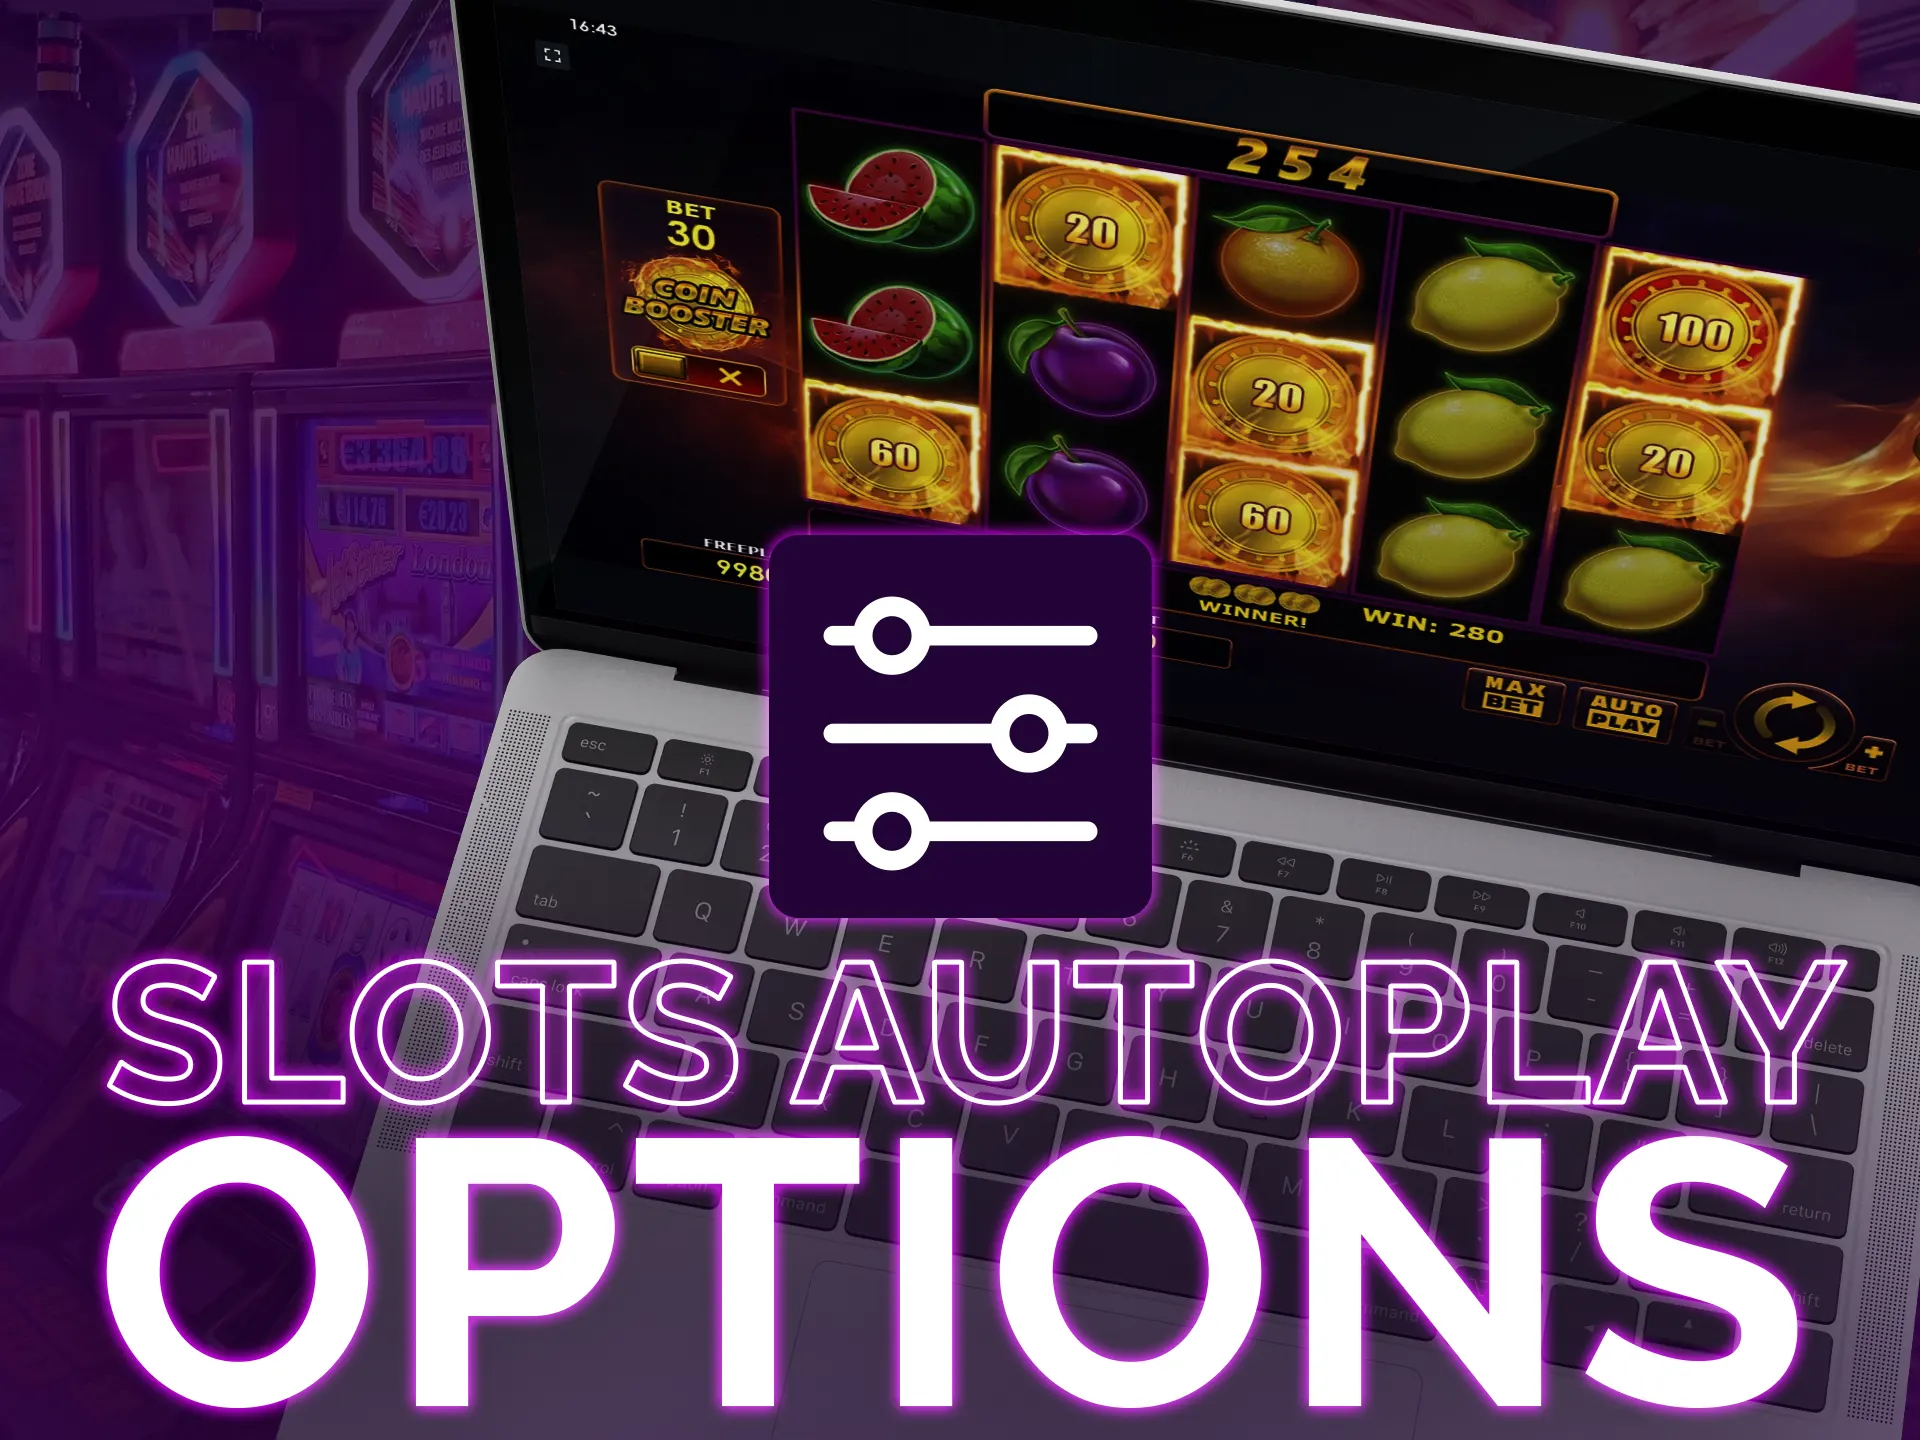 Slots autoplay options include spins, speed, bet, and stopping conditions.